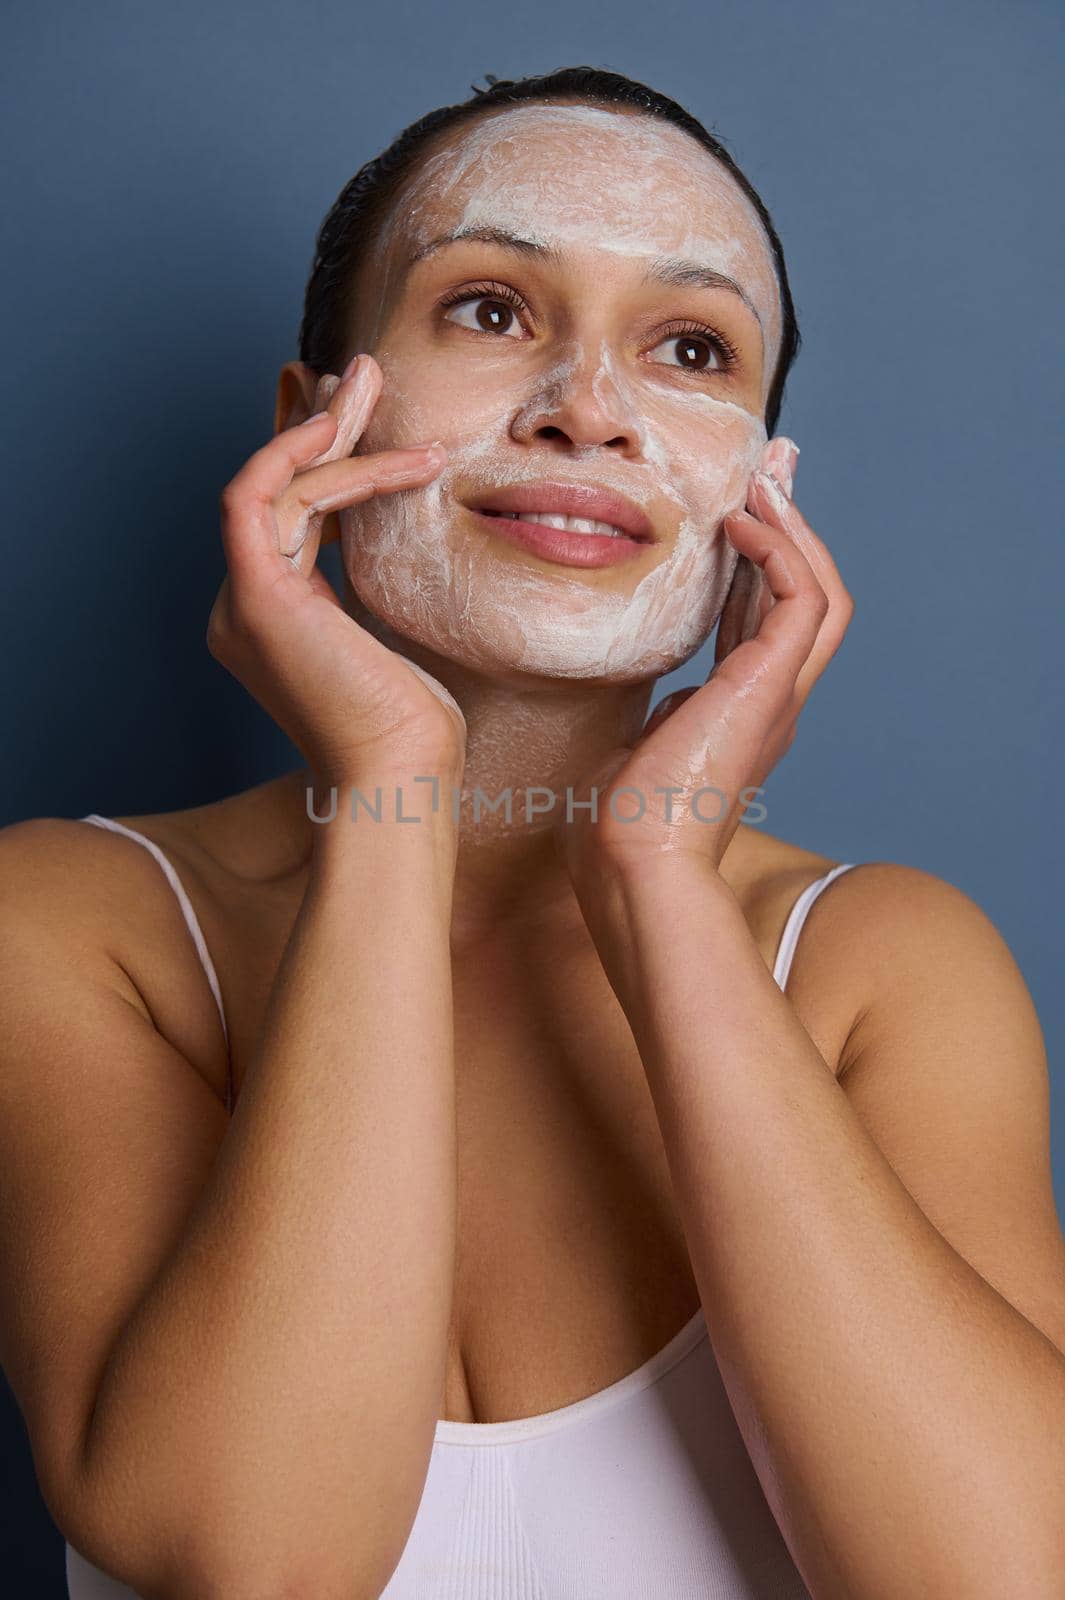 Charming woman applying foam cleansing cosmetic product on her face, doing massage movements, removing make-up and refreshing her skin using an exfoliant beauty product, isolated over gray background by artgf